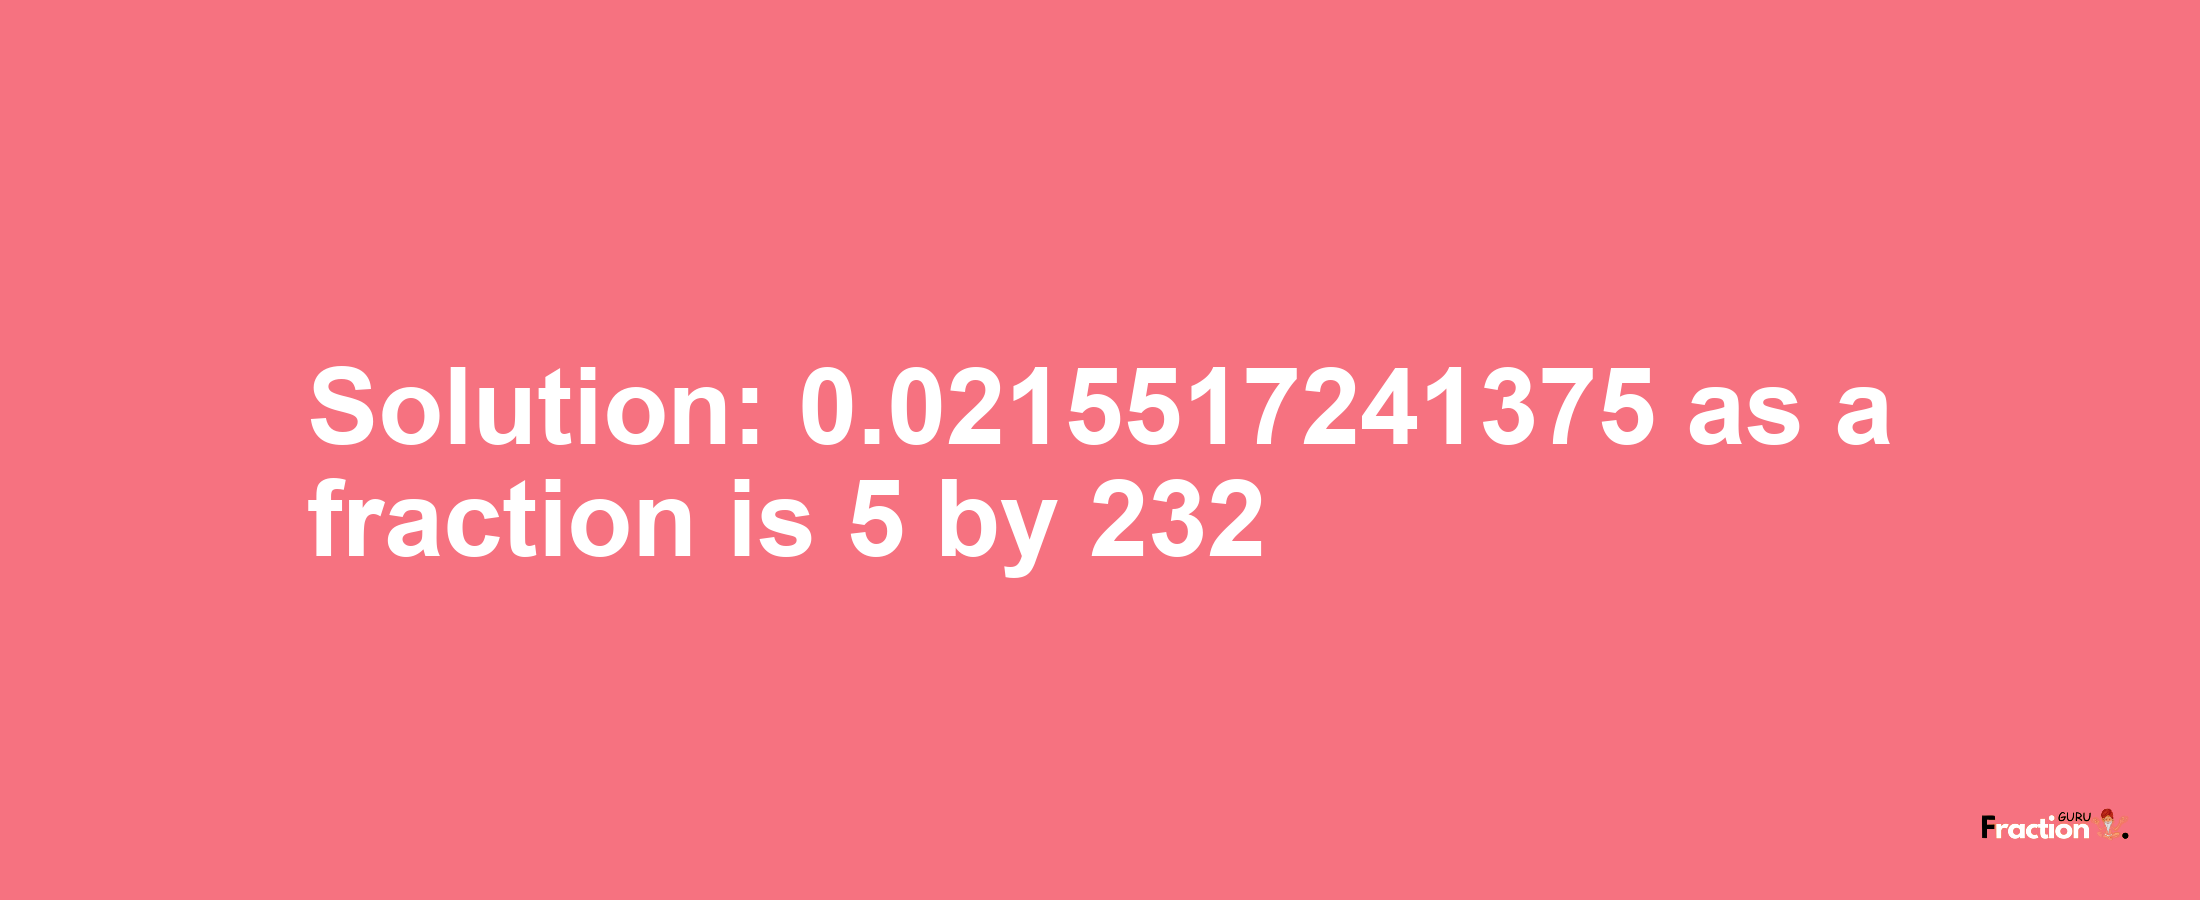 Solution:0.0215517241375 as a fraction is 5/232